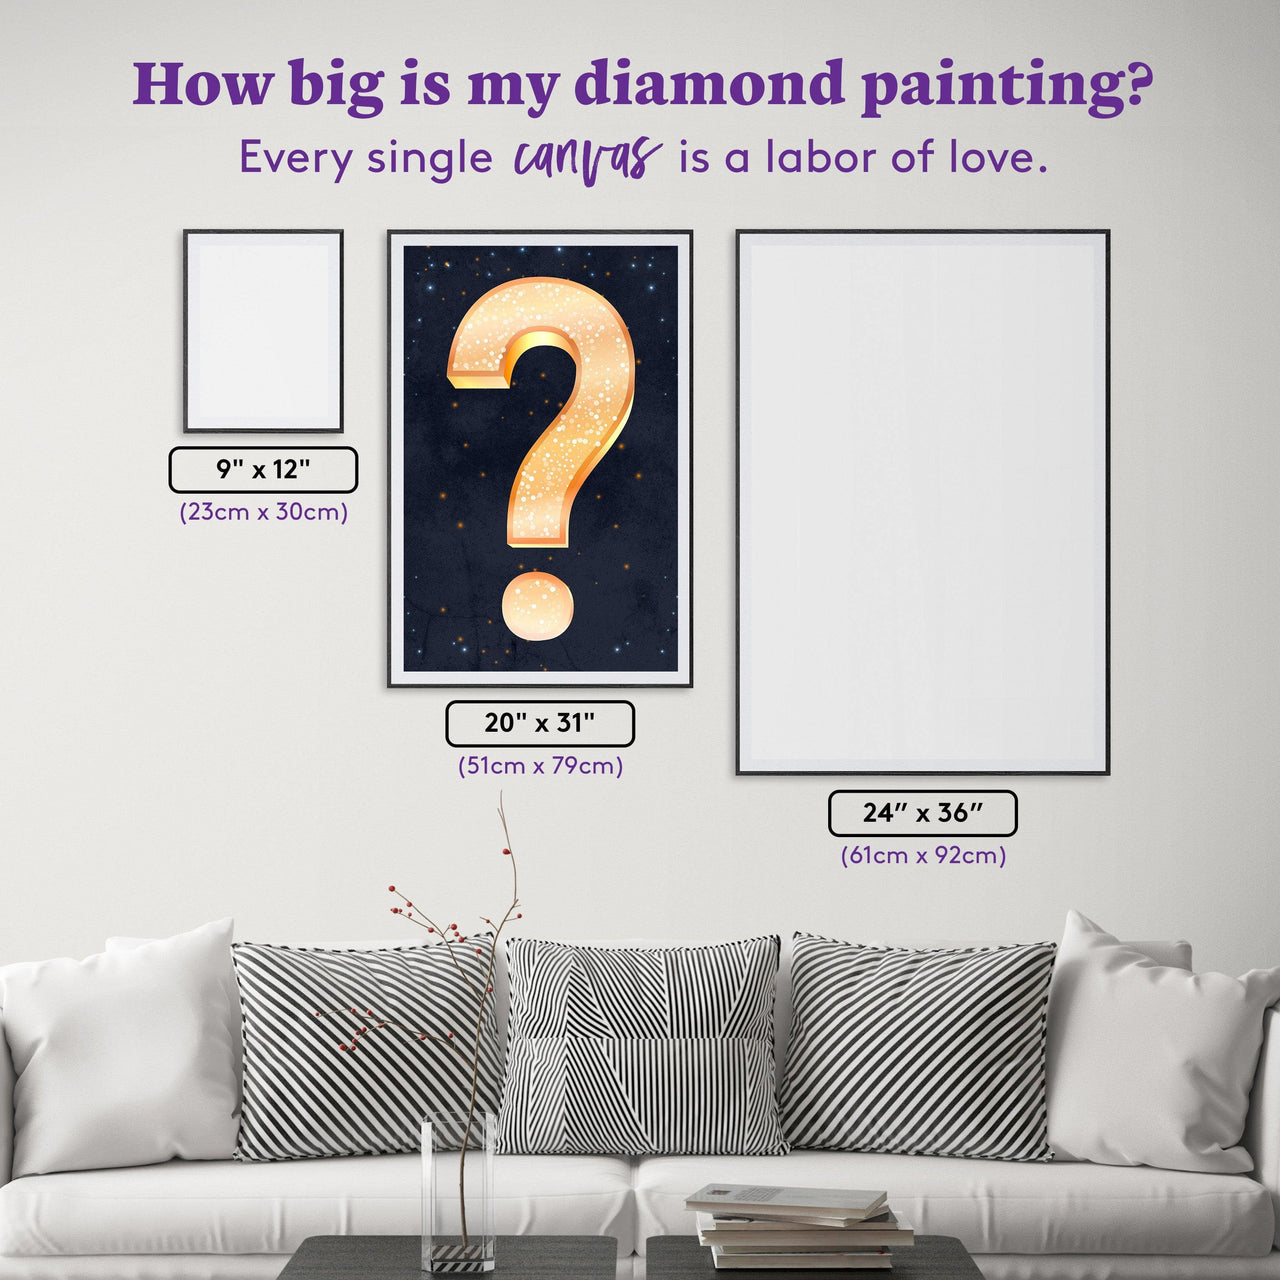 Diamond Painting Mystery Kit - Fantasy 20" x 31" (51cm x 79cm) / Square With 52 Colors Including 3 ABs / 62,712